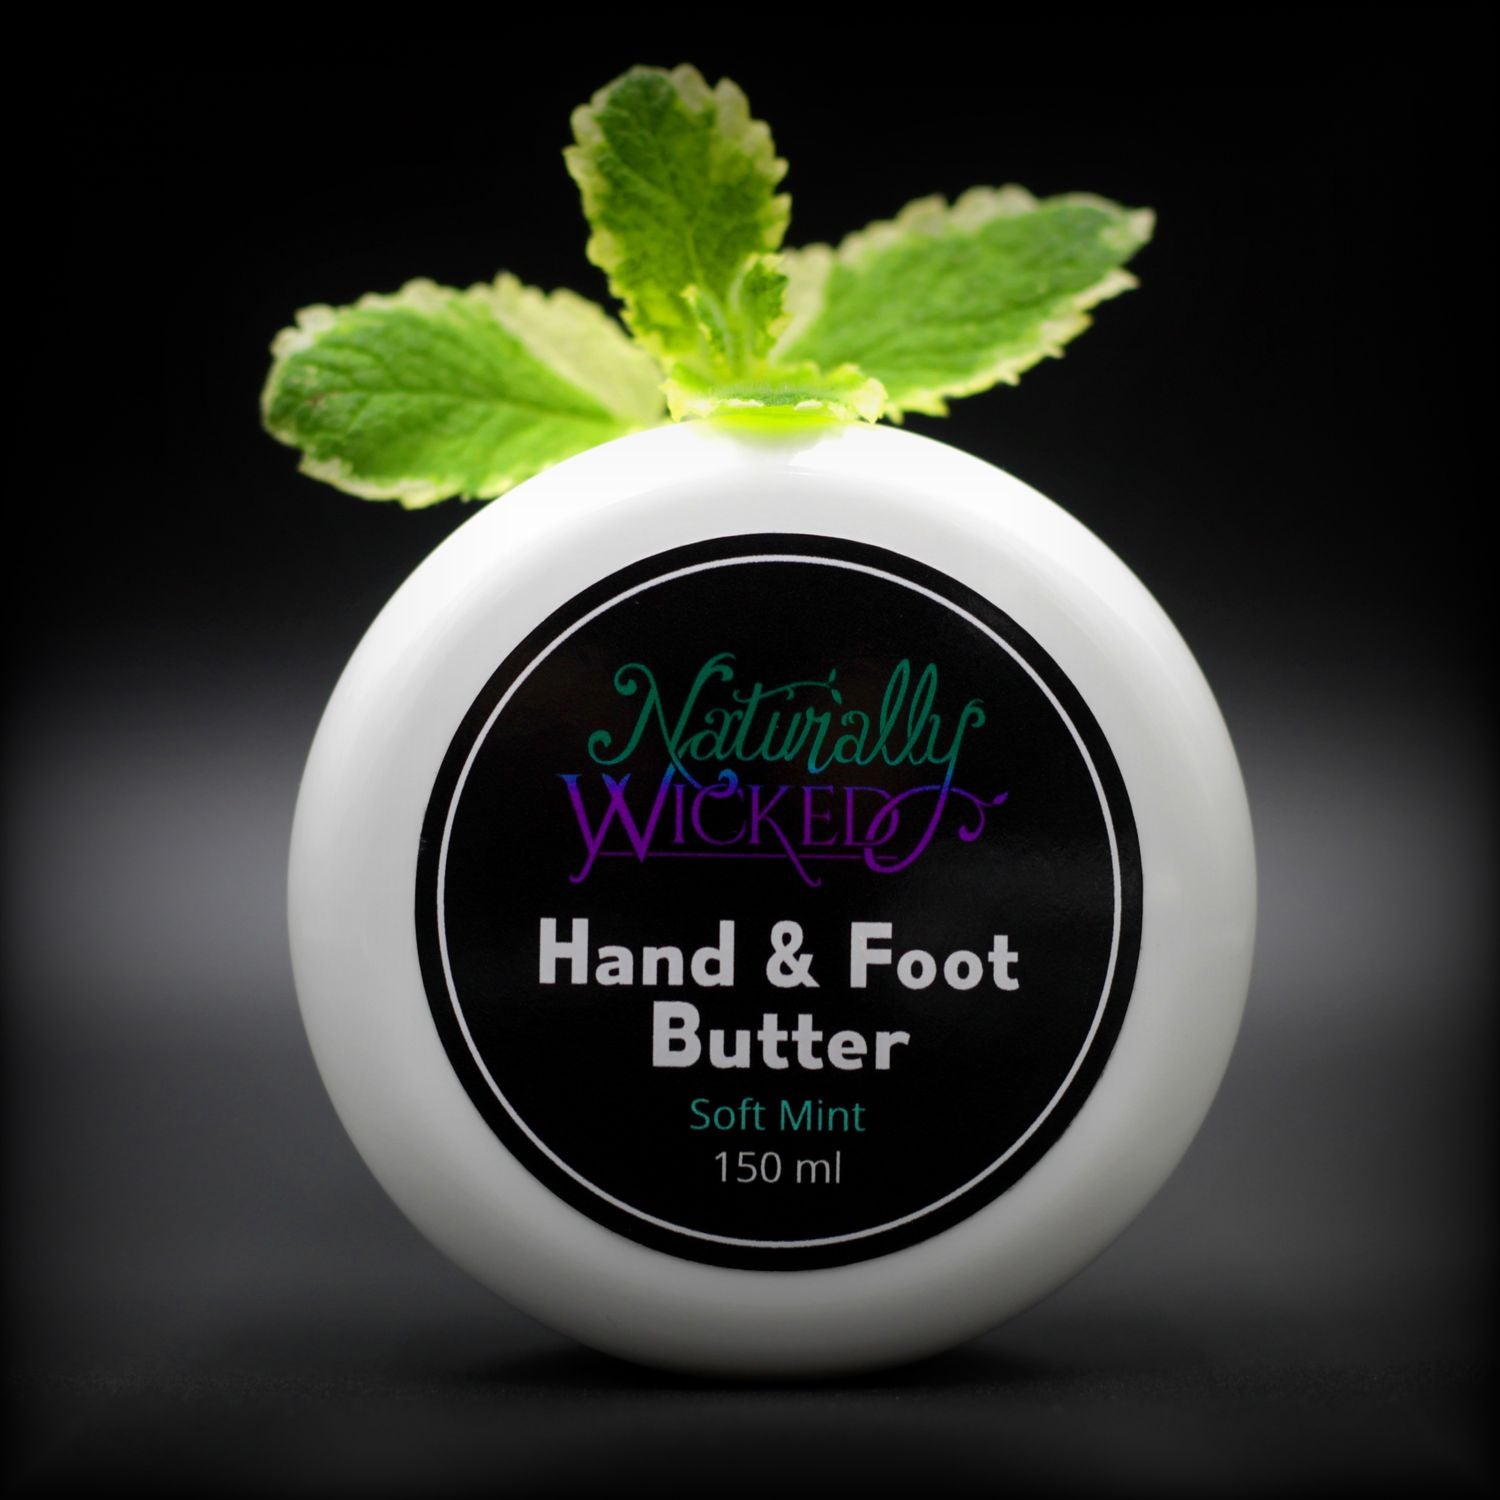 Naturally Wicked Soft Mint Hand & Foot Butter Lid With Green & White Mint Leaves On Top